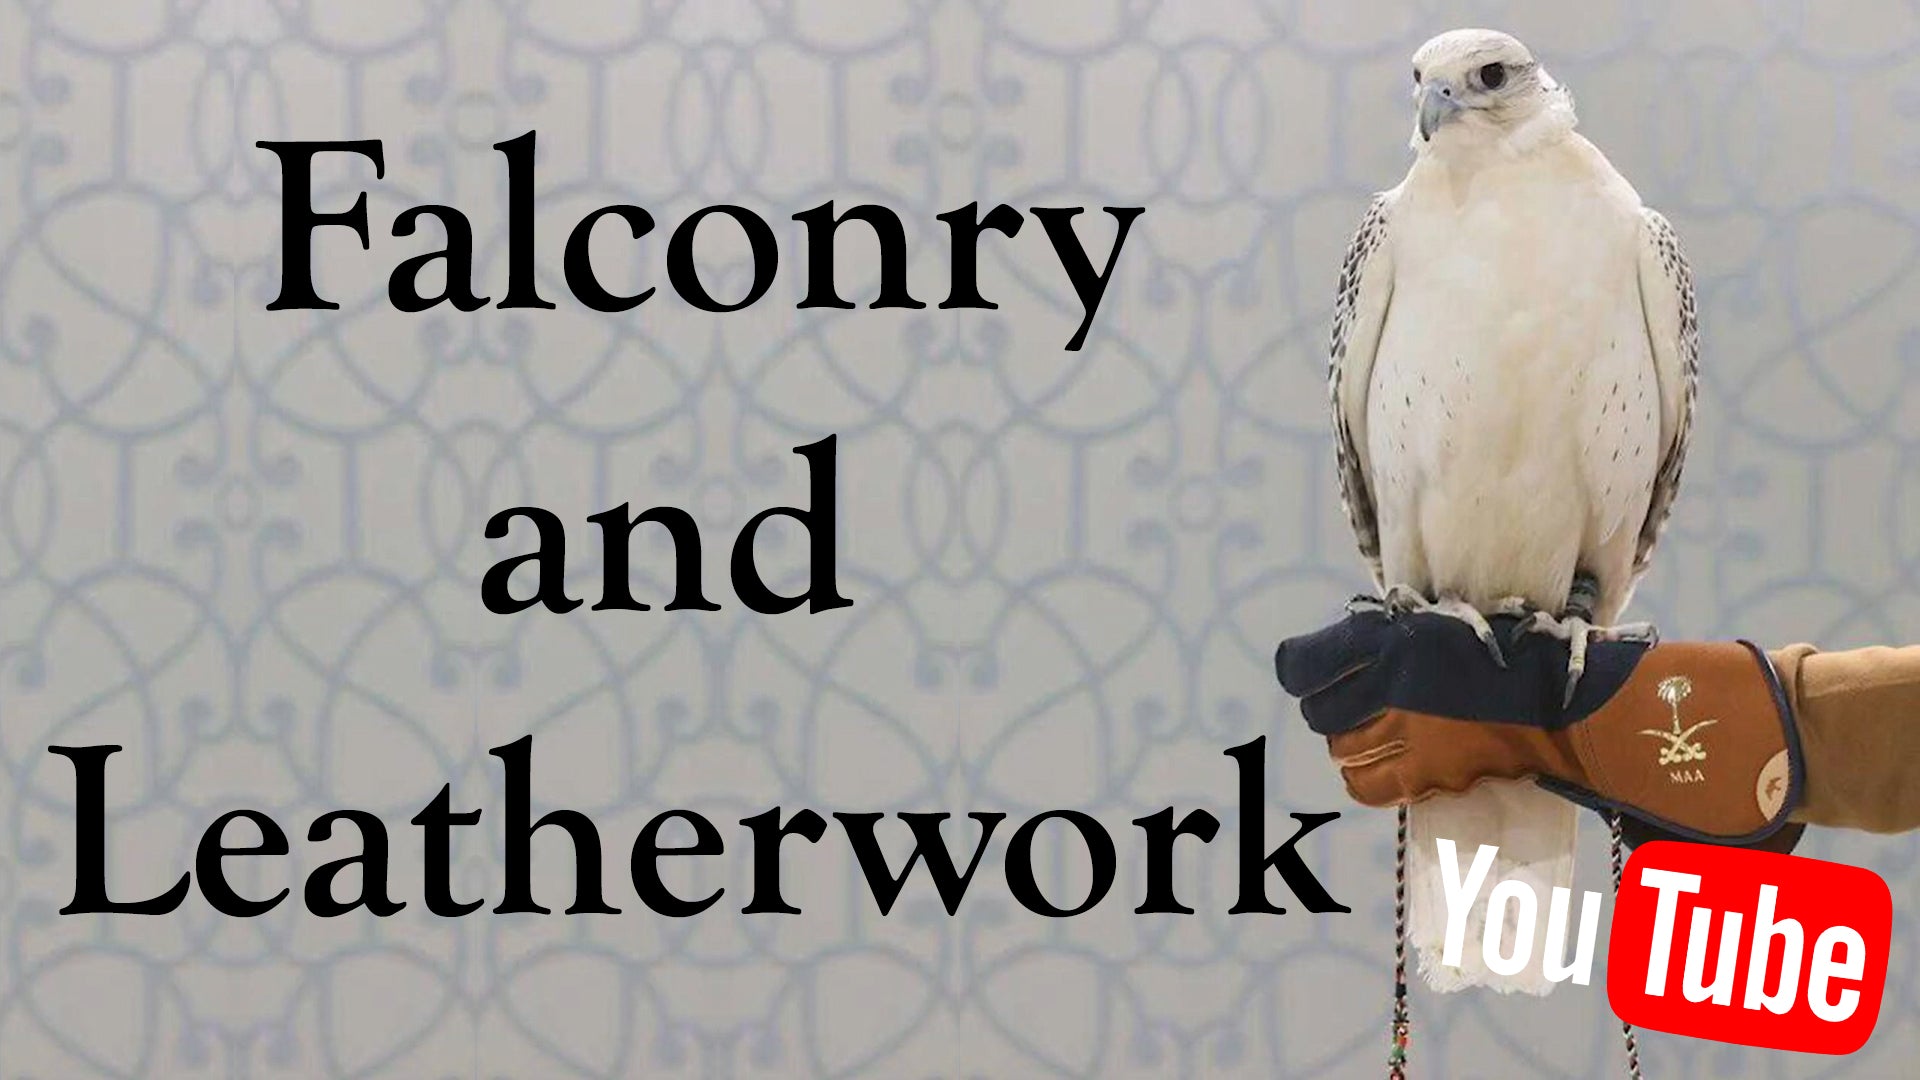 Load video: Falconry and Leatherwork